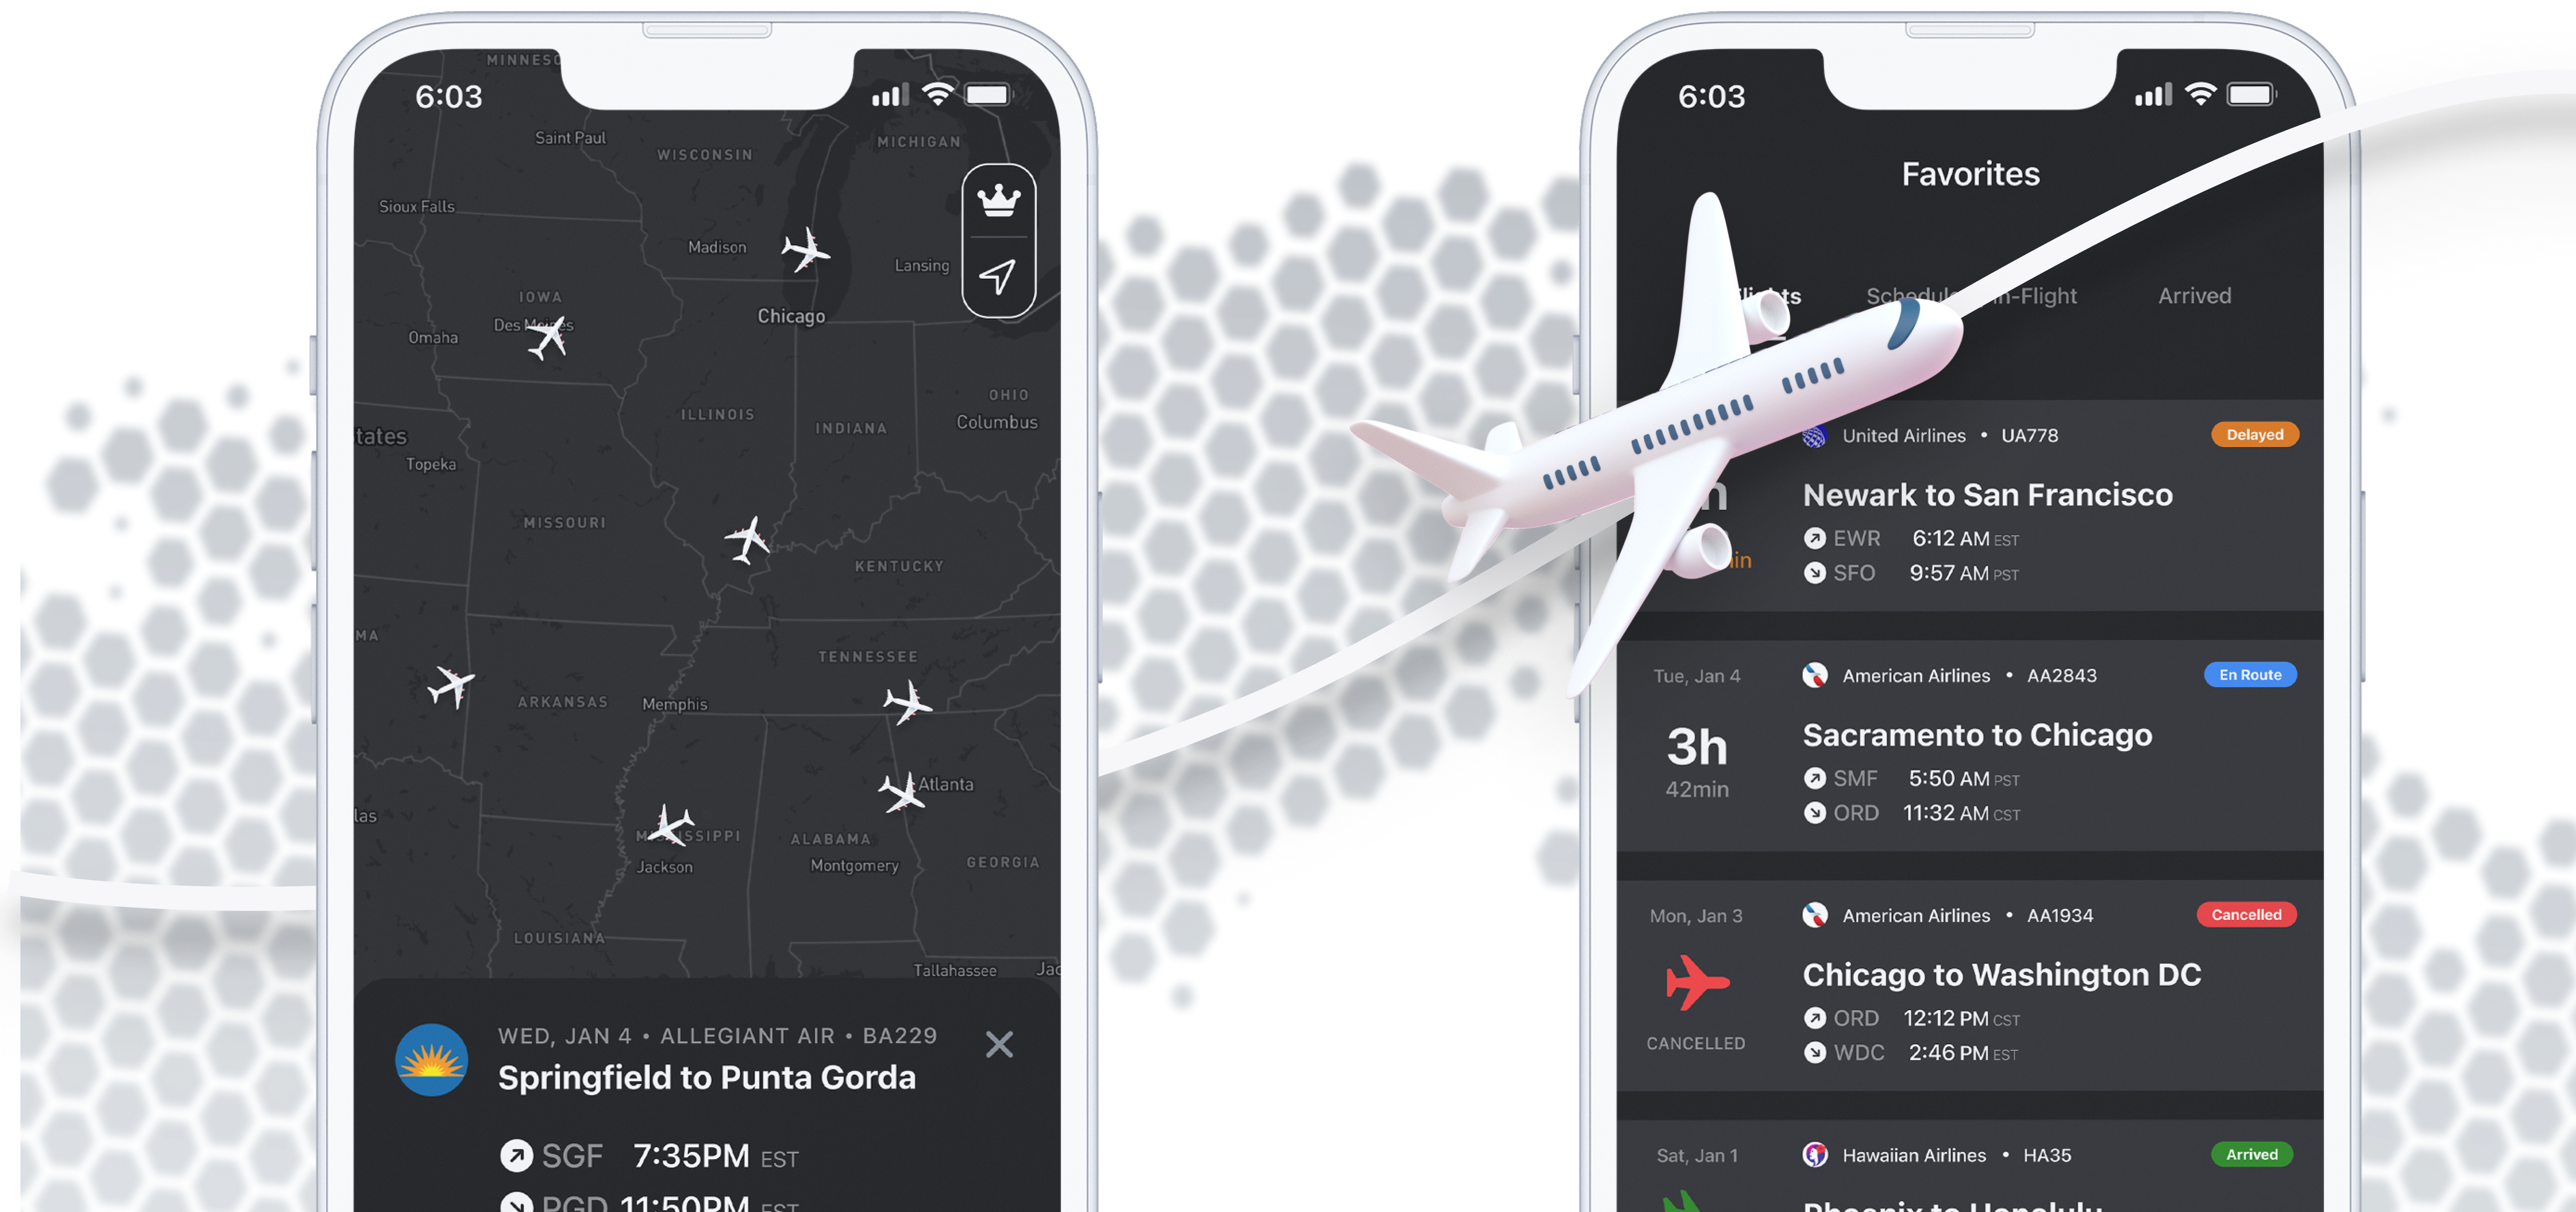 Multiple iPhones displaying various flight tracking and informational screens